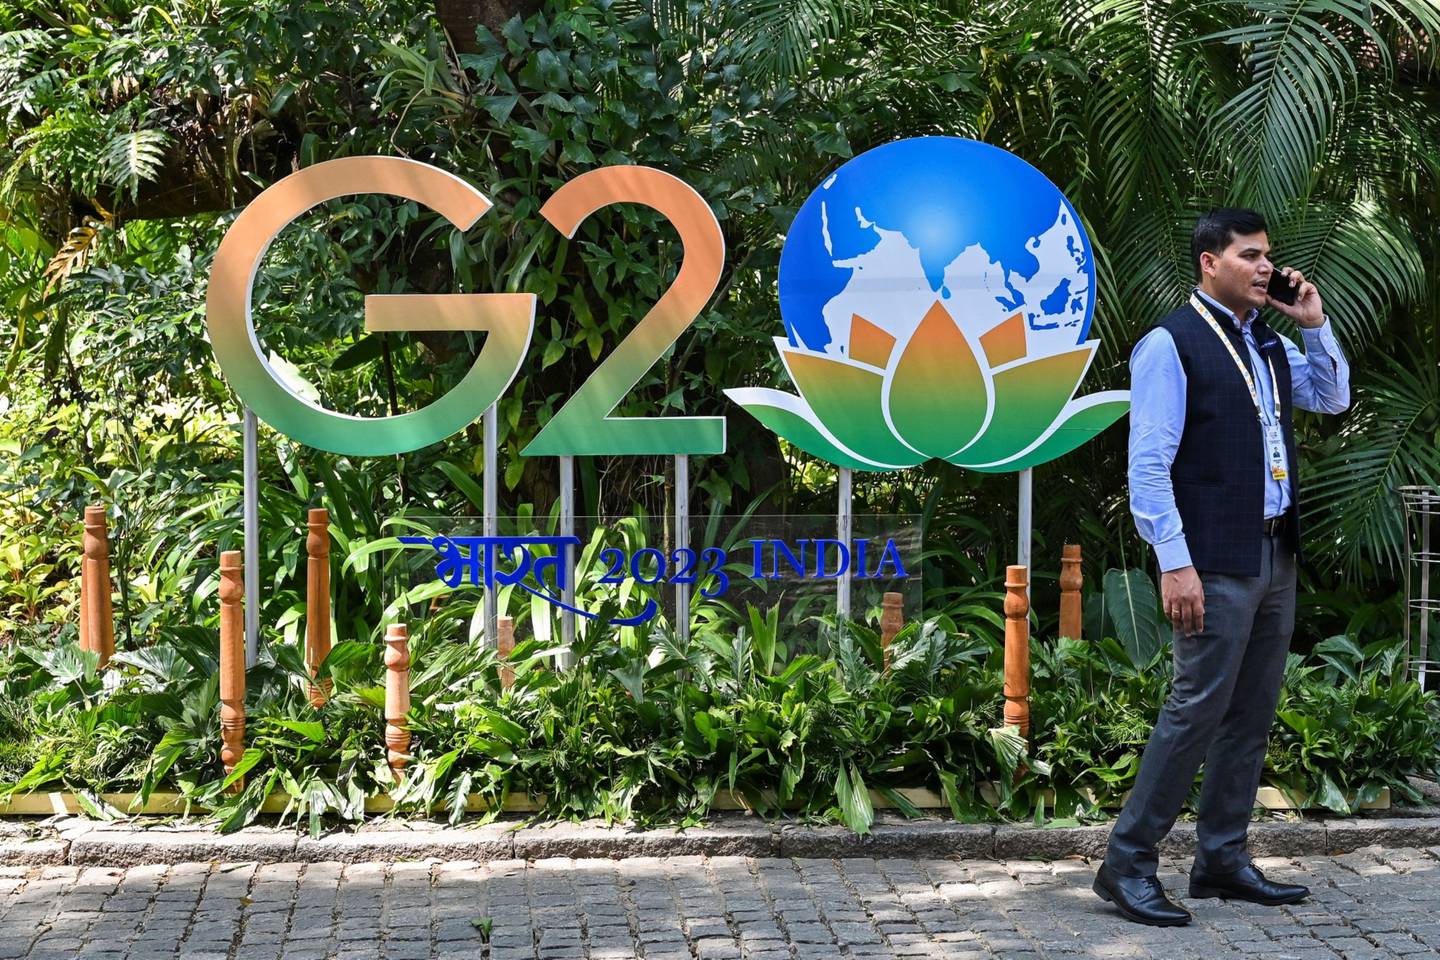 An official walks past India's G20 logo at the venue of the 1st Environment and Climate Sustainability working group meeting under Indias G20 Presidency in Bengaluru on February 9, 2023. Photographer: Manjunath Kiran/AFP/Getty Images